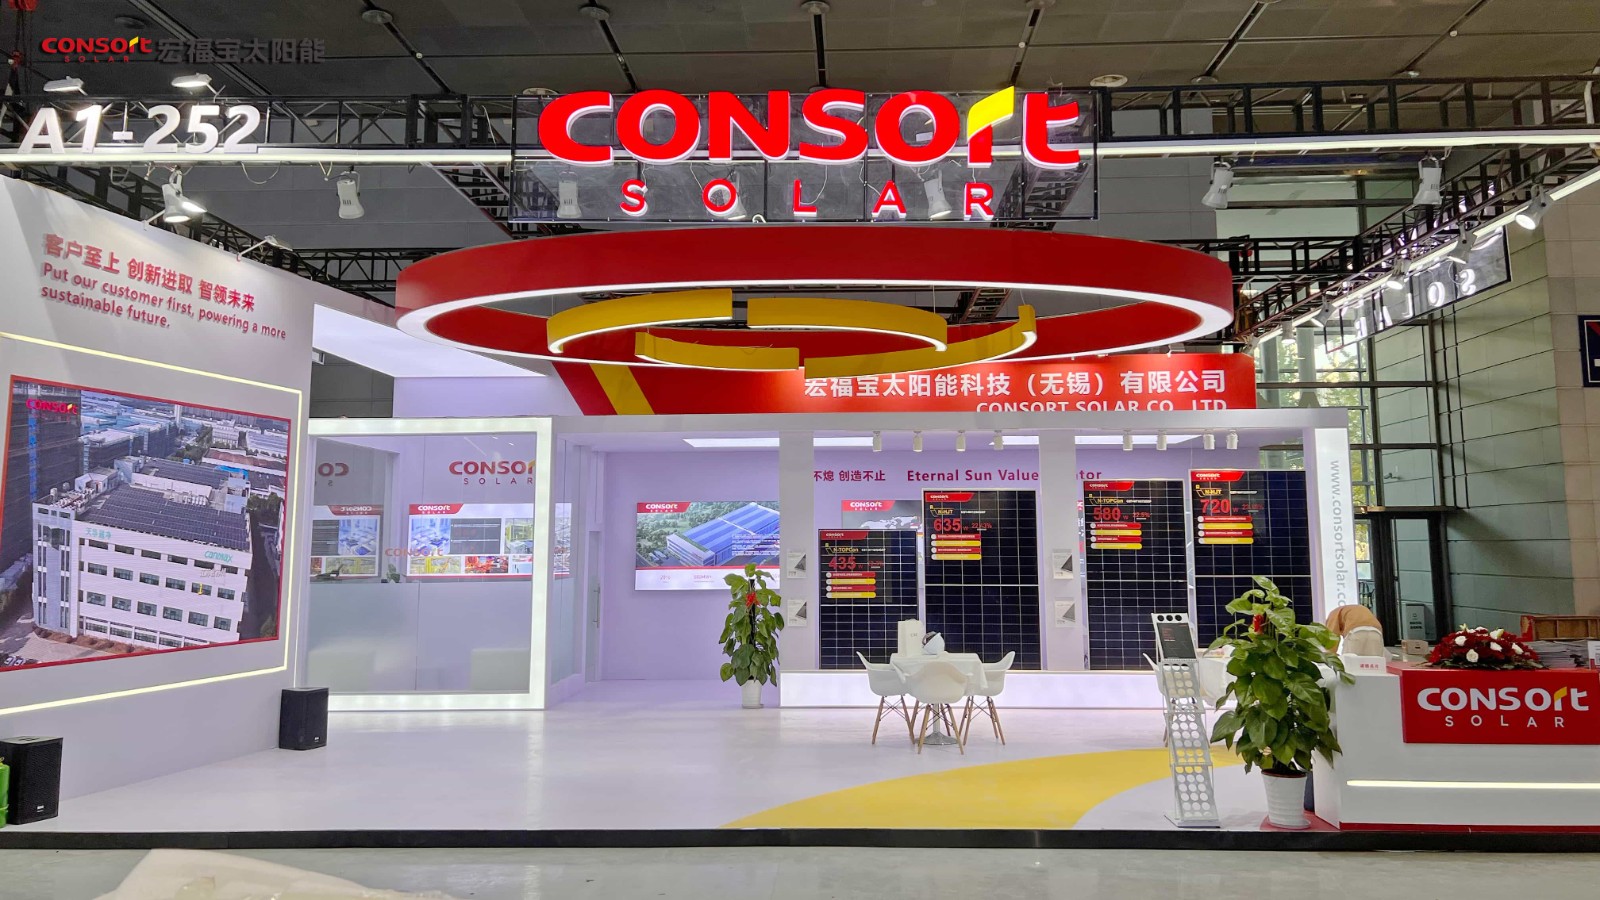 Consort Solar Exhibits N-Type Modules at The 15th Chinese Renewable Energy Conference and Exhibition